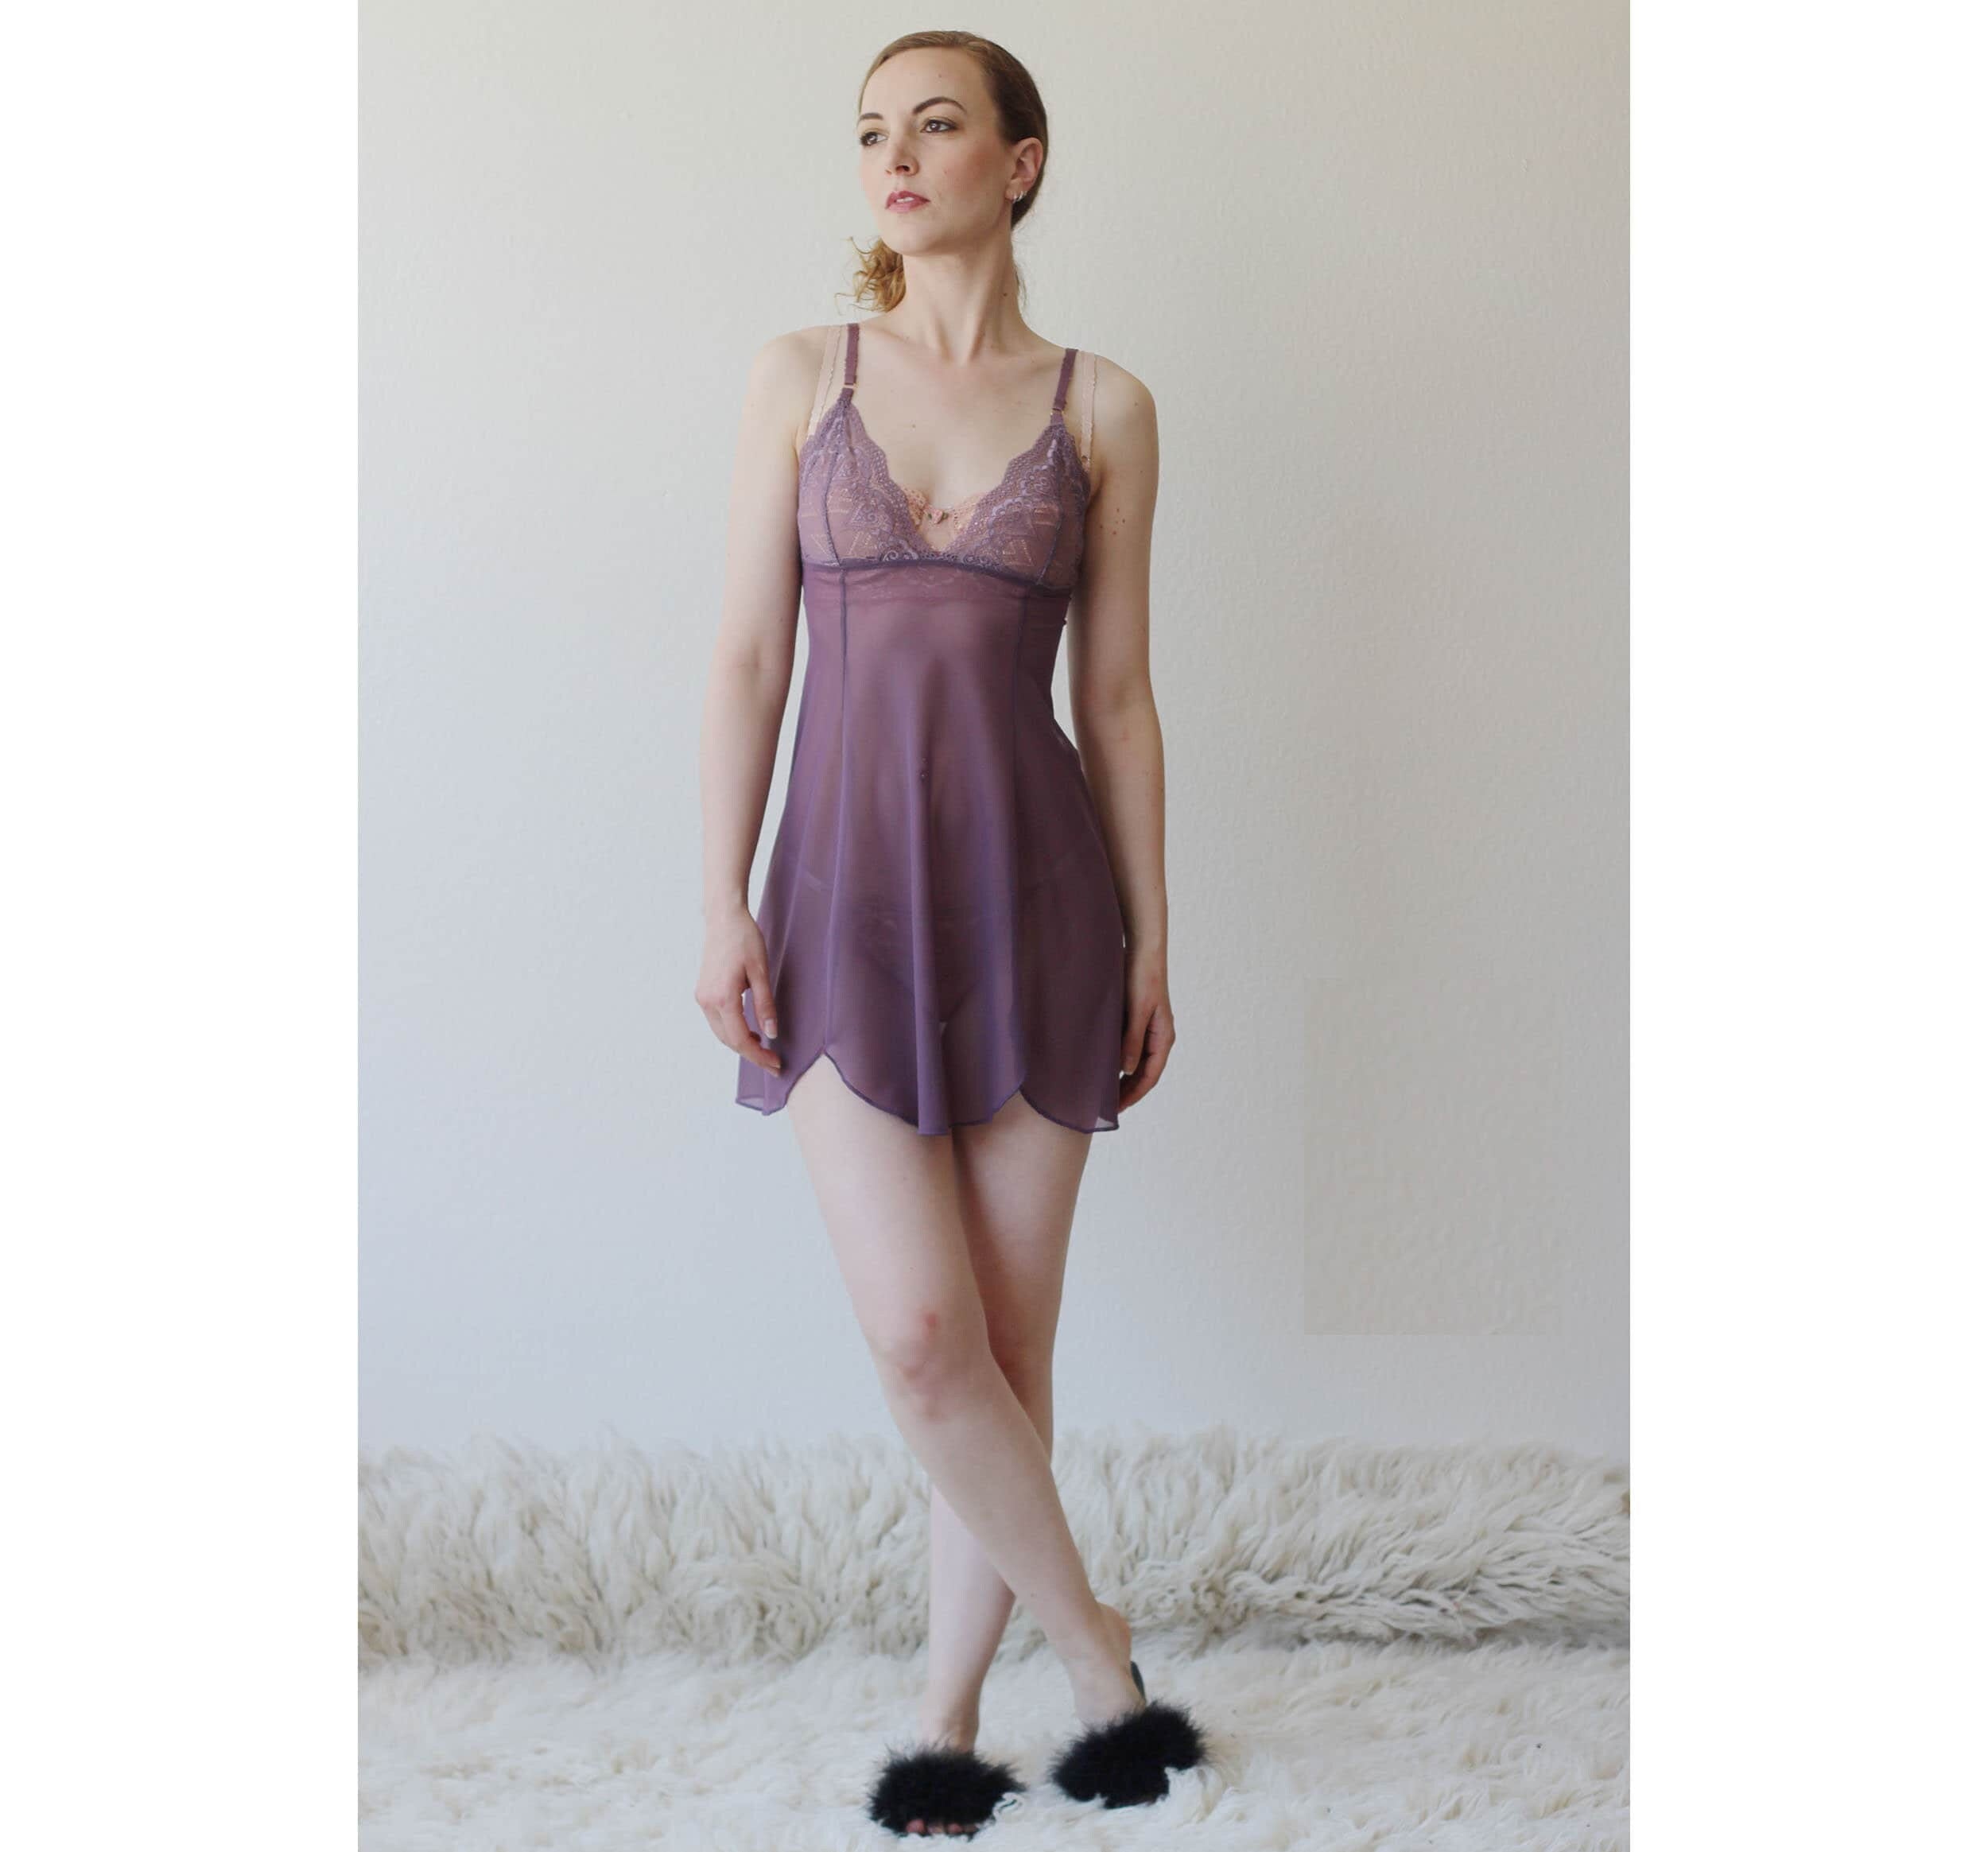 Sheer mesh nightgown with lace cups and scalloped hemline, Ready to Ship, Various Sizes, Lavender Purple